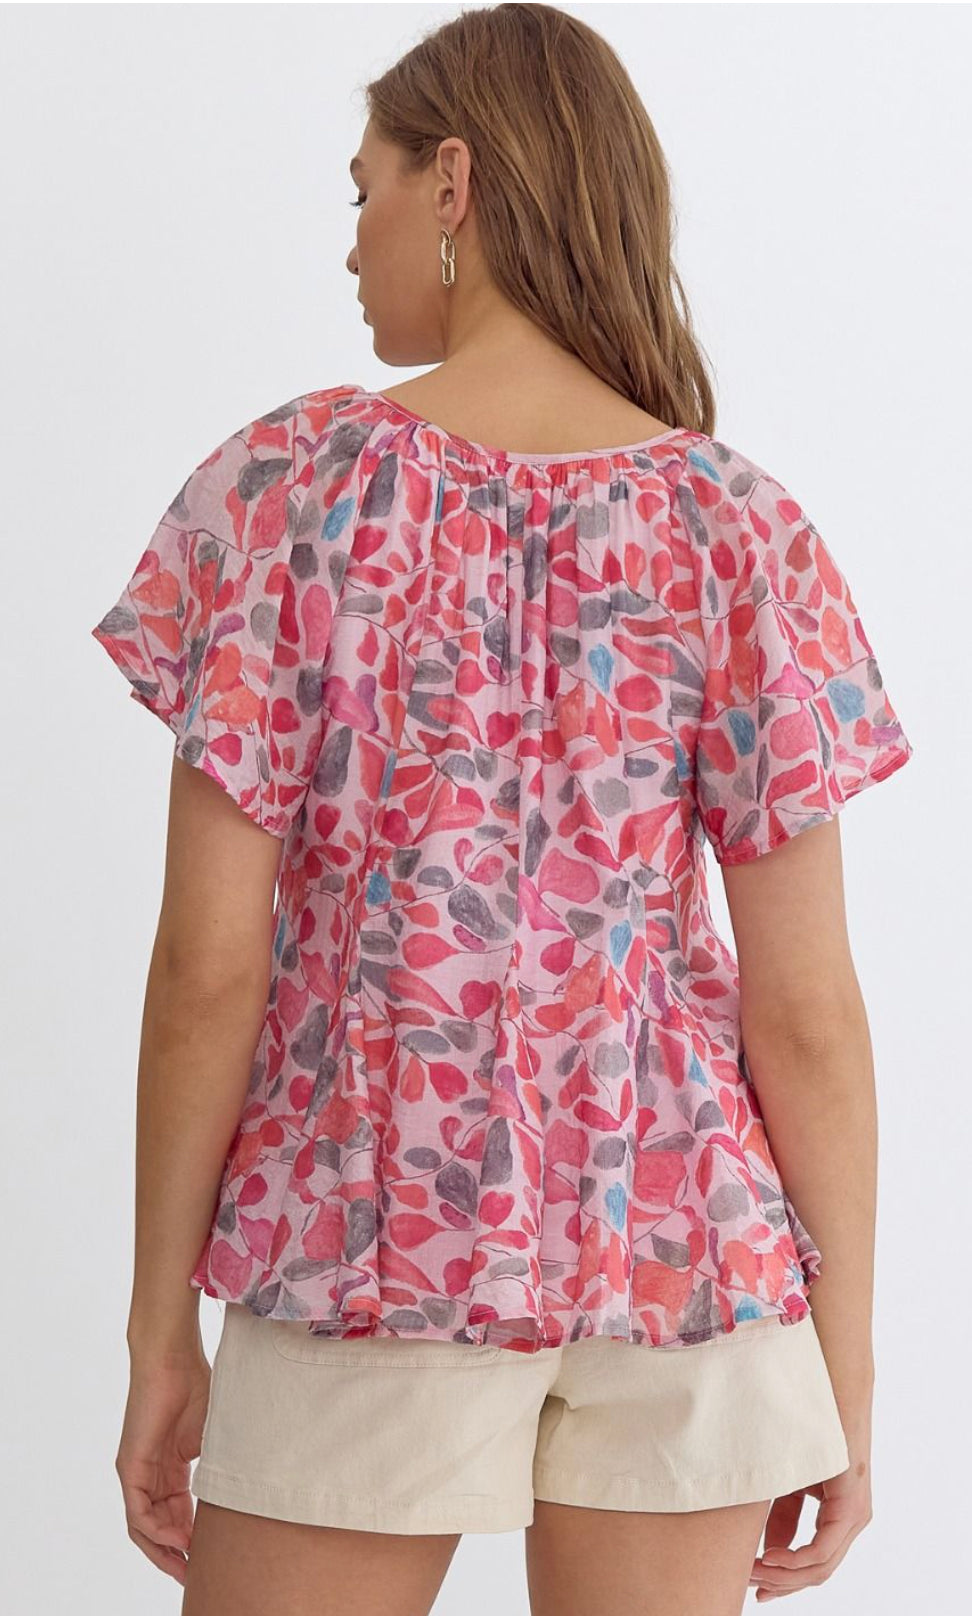 Printed Short-Sleeved Top featuring Flared Detail